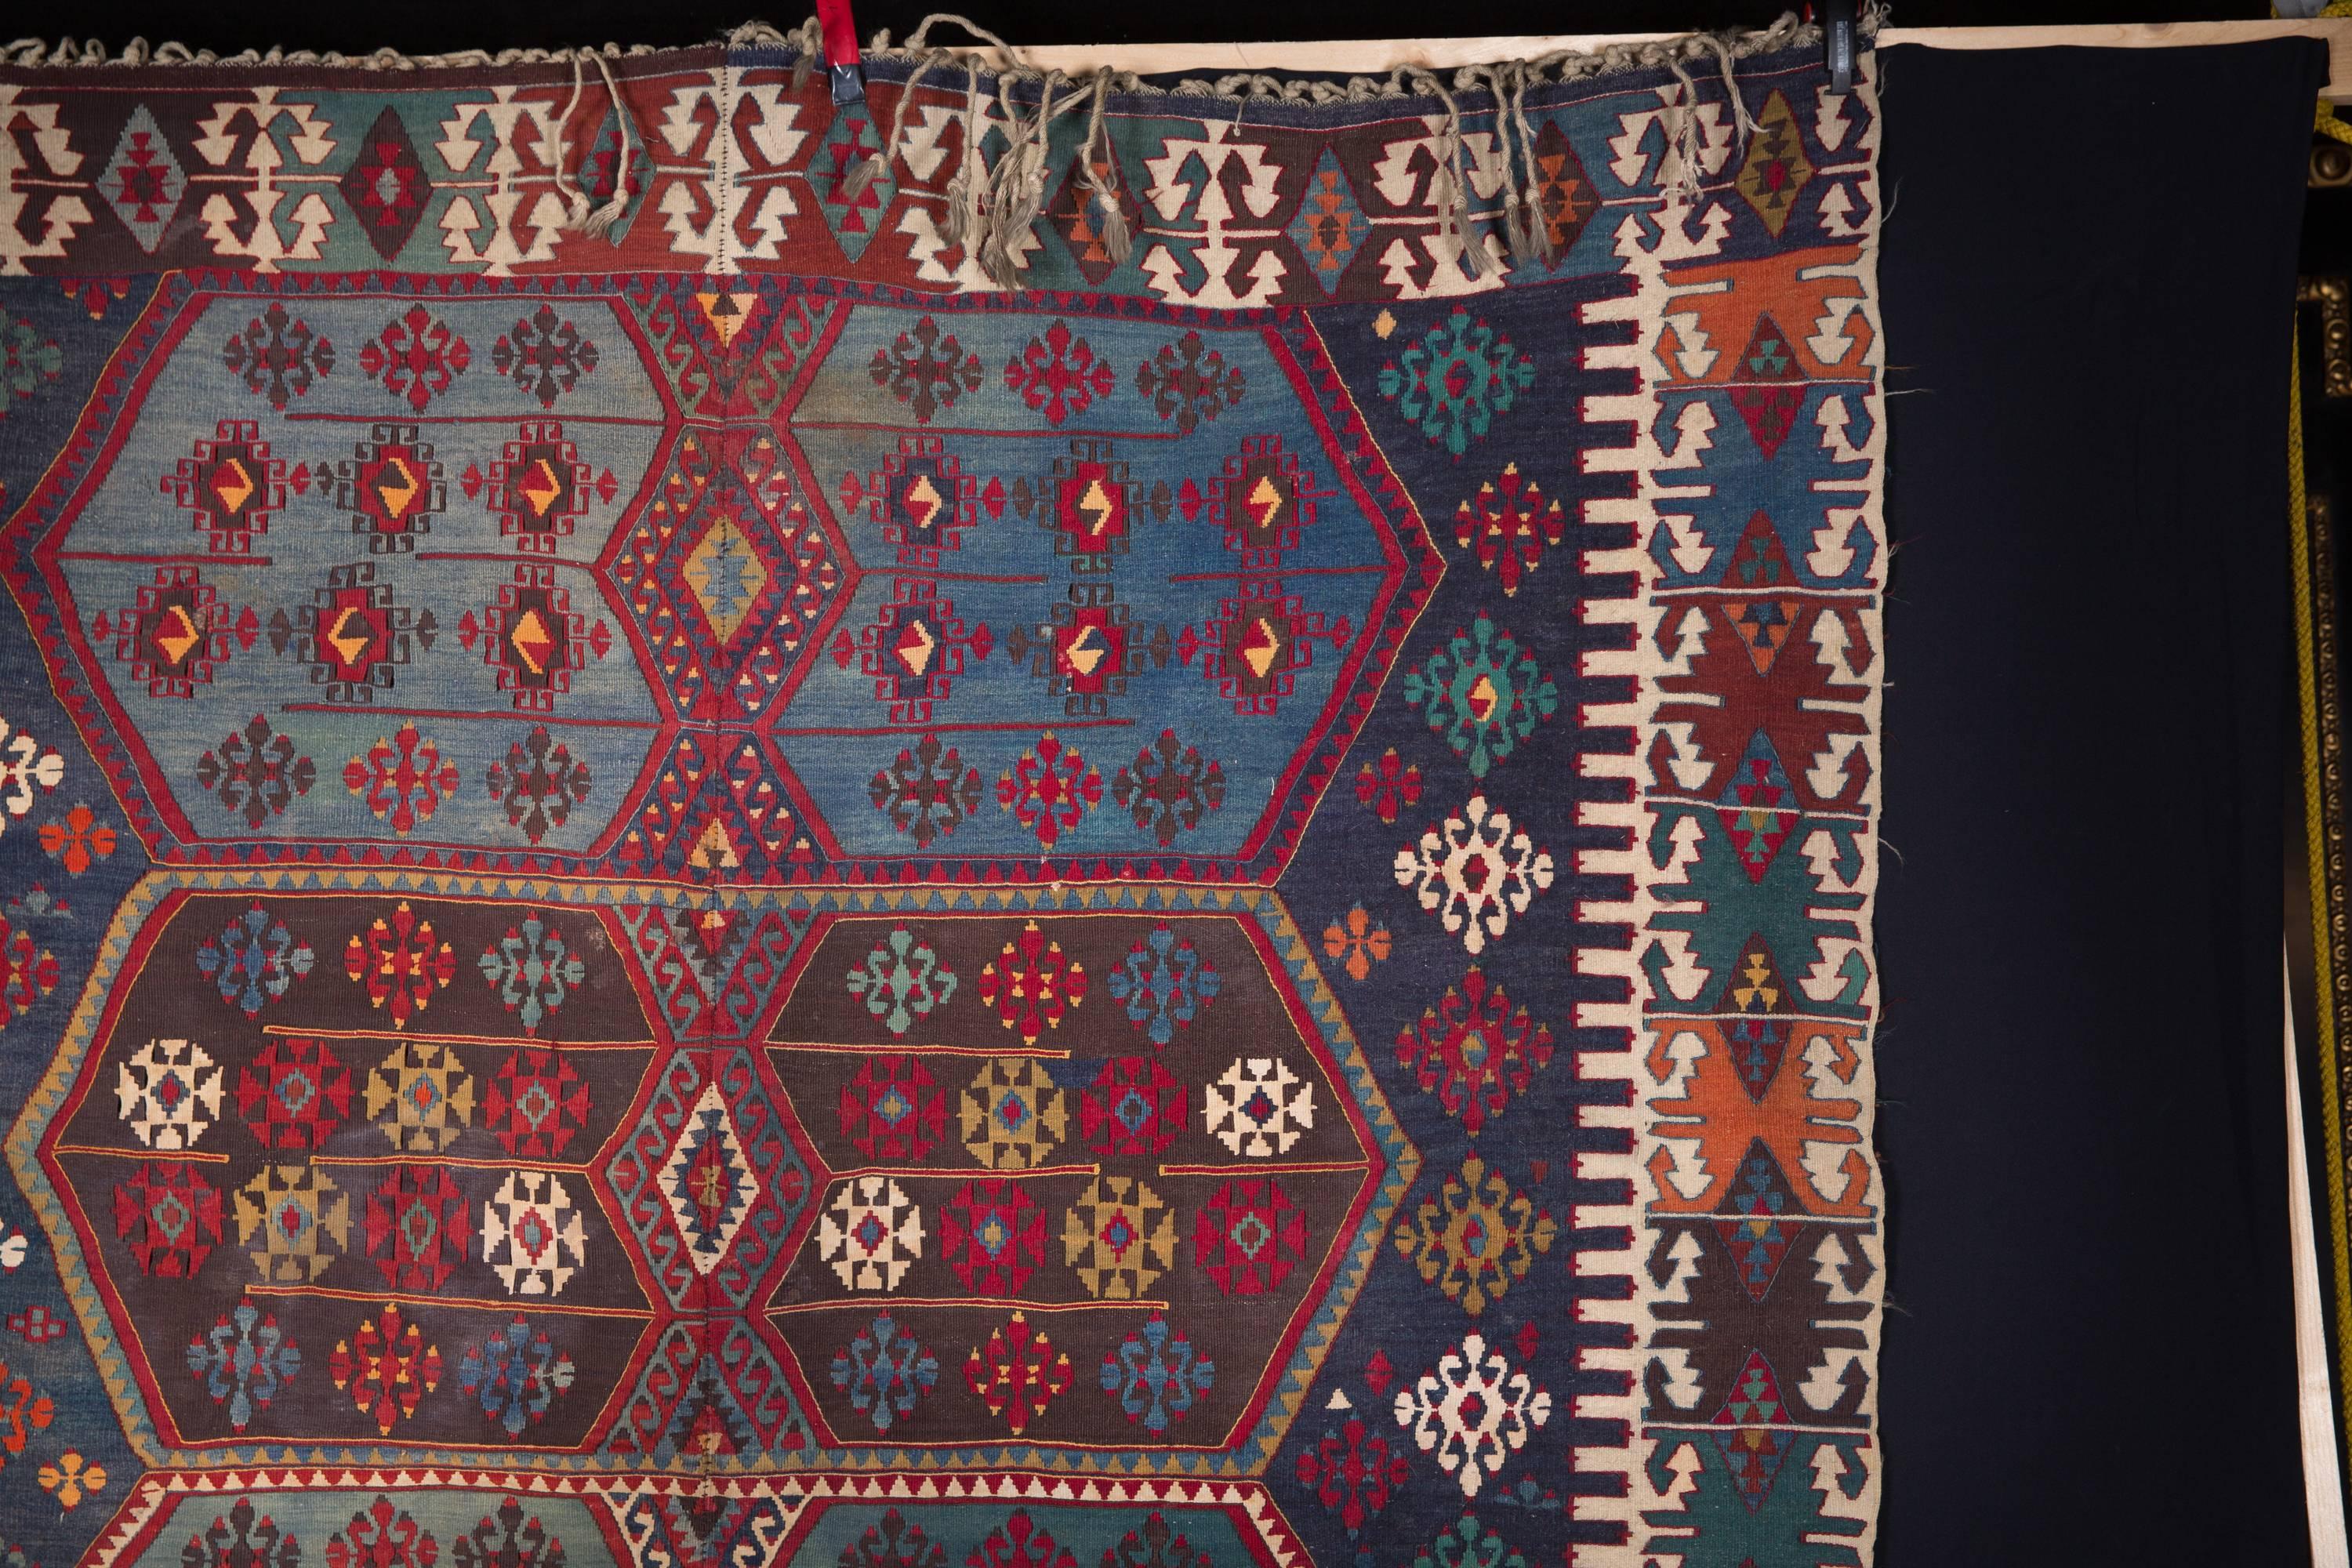 Hand-Knotted Large Antique Gallery Carpet Turkish Kilim, circa 1900